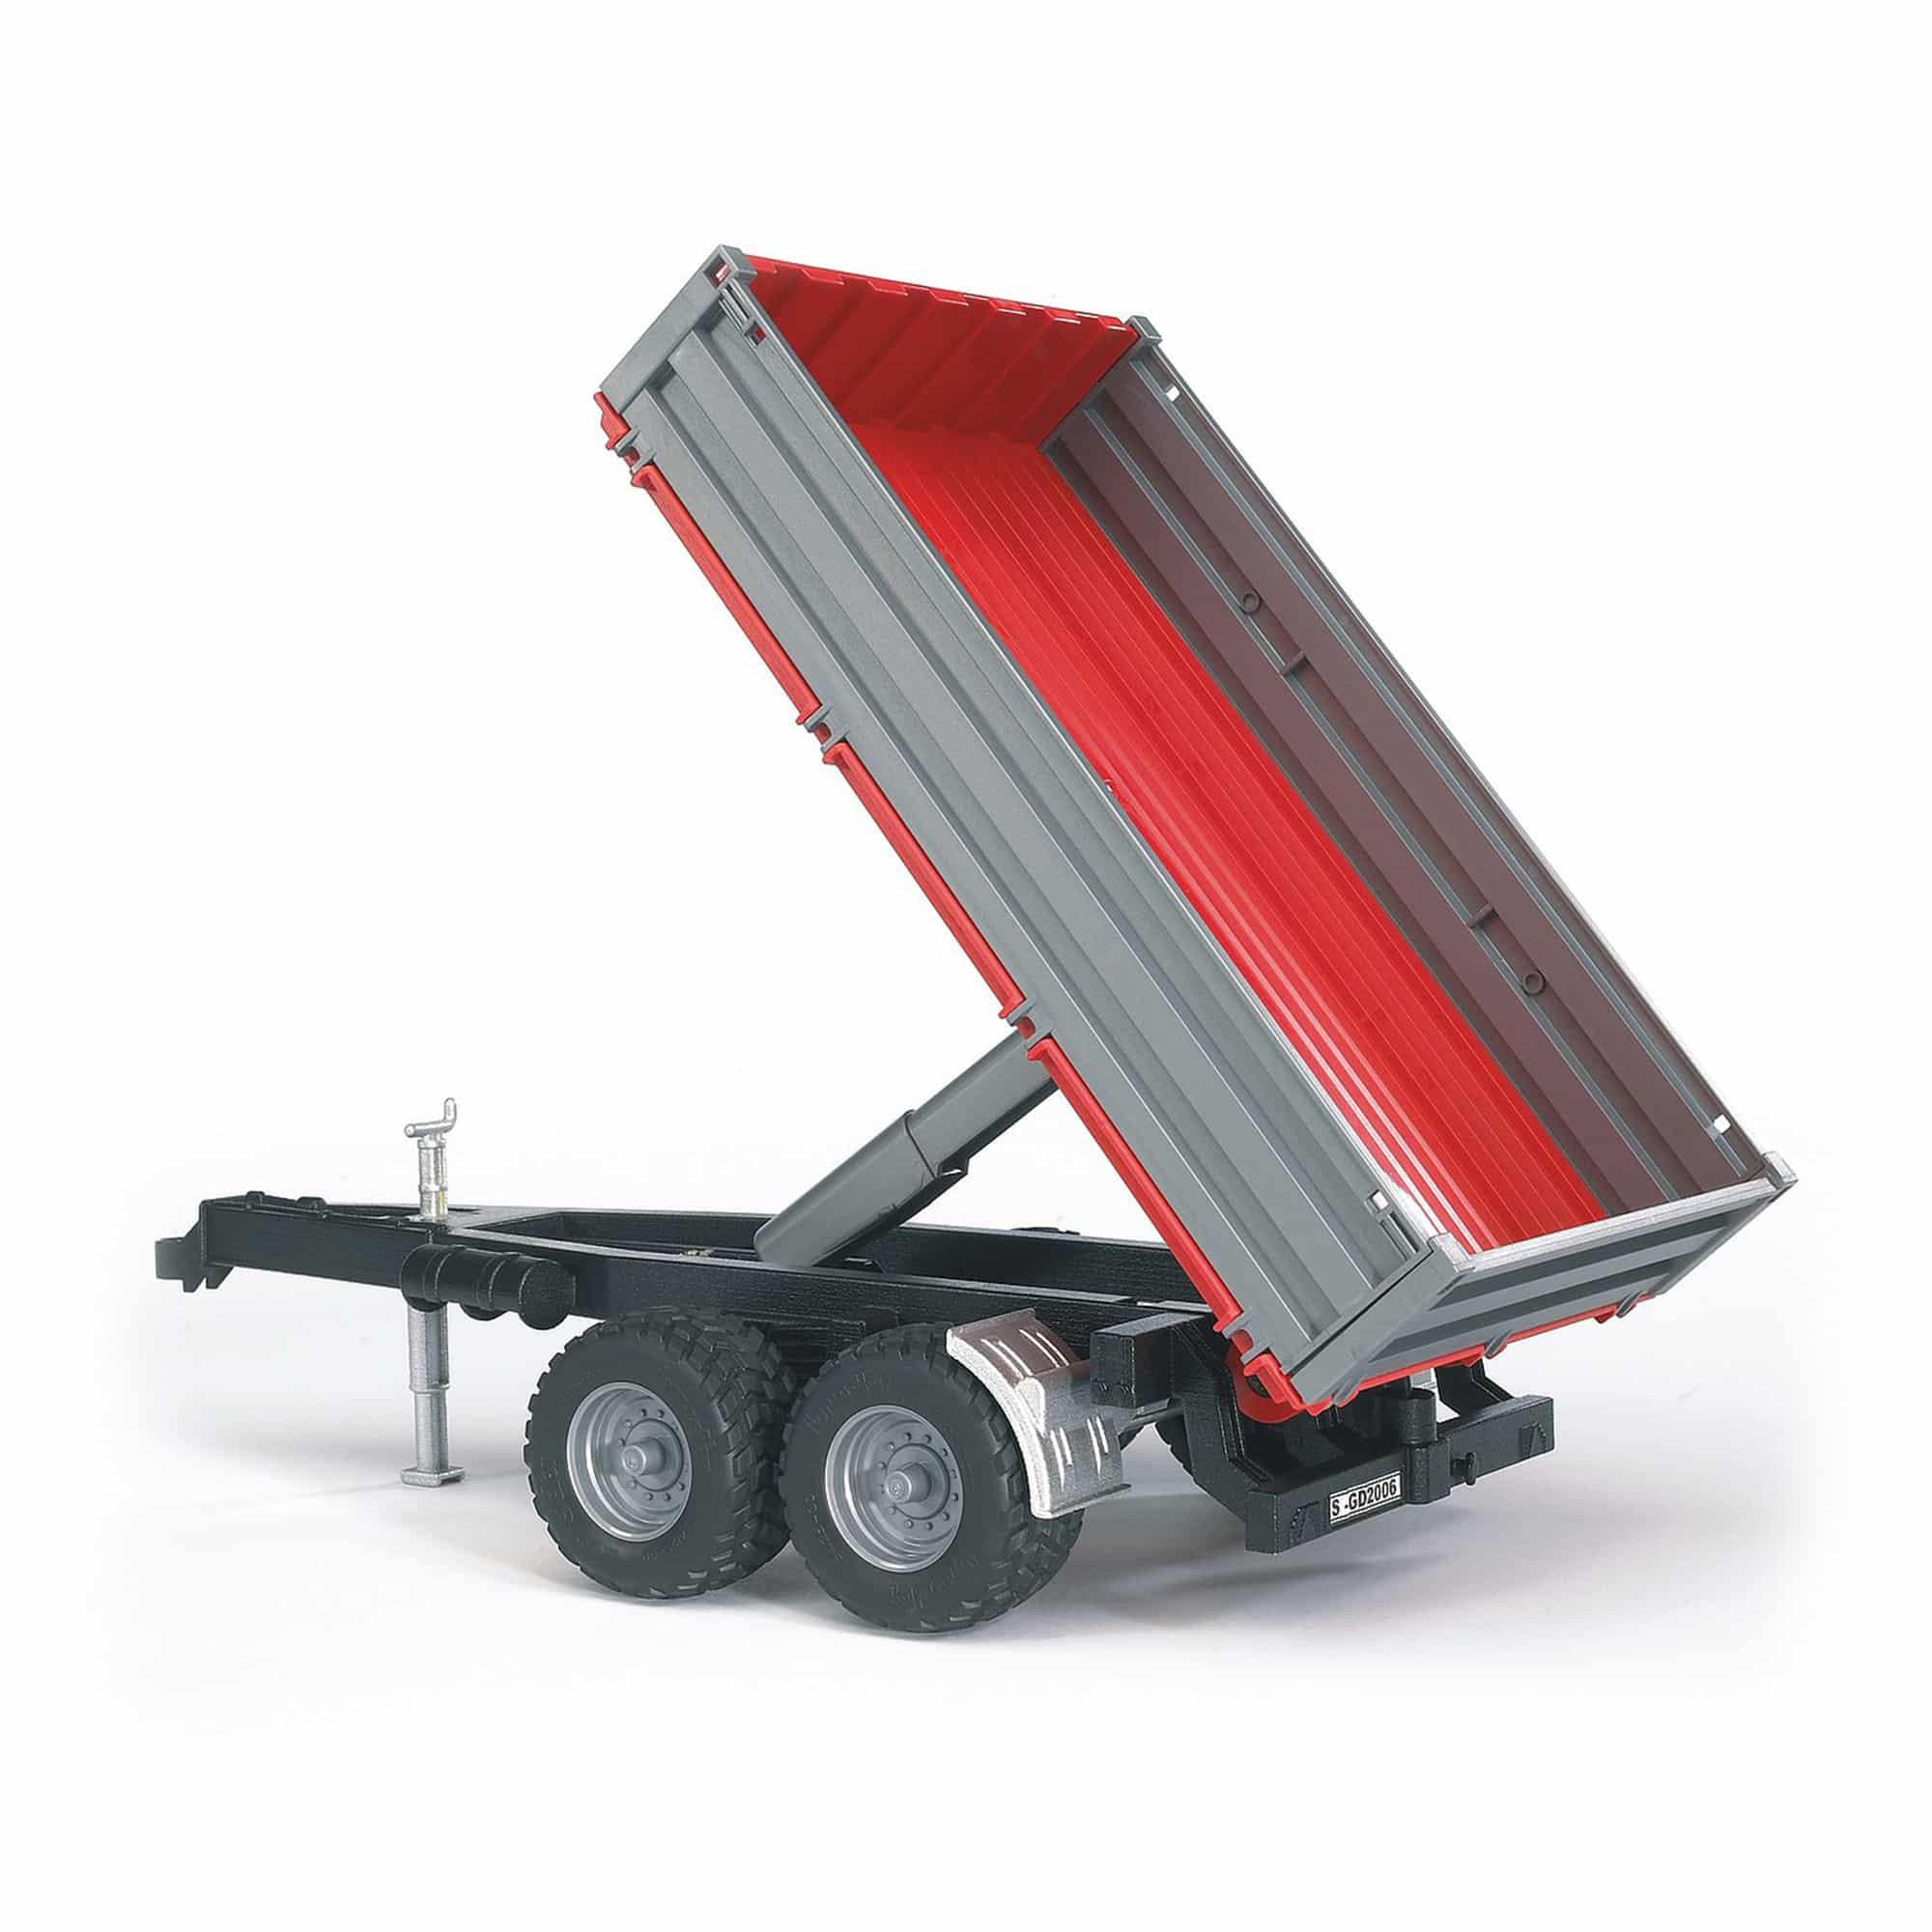 Bruder -Tipping Trailer With Grey Sides